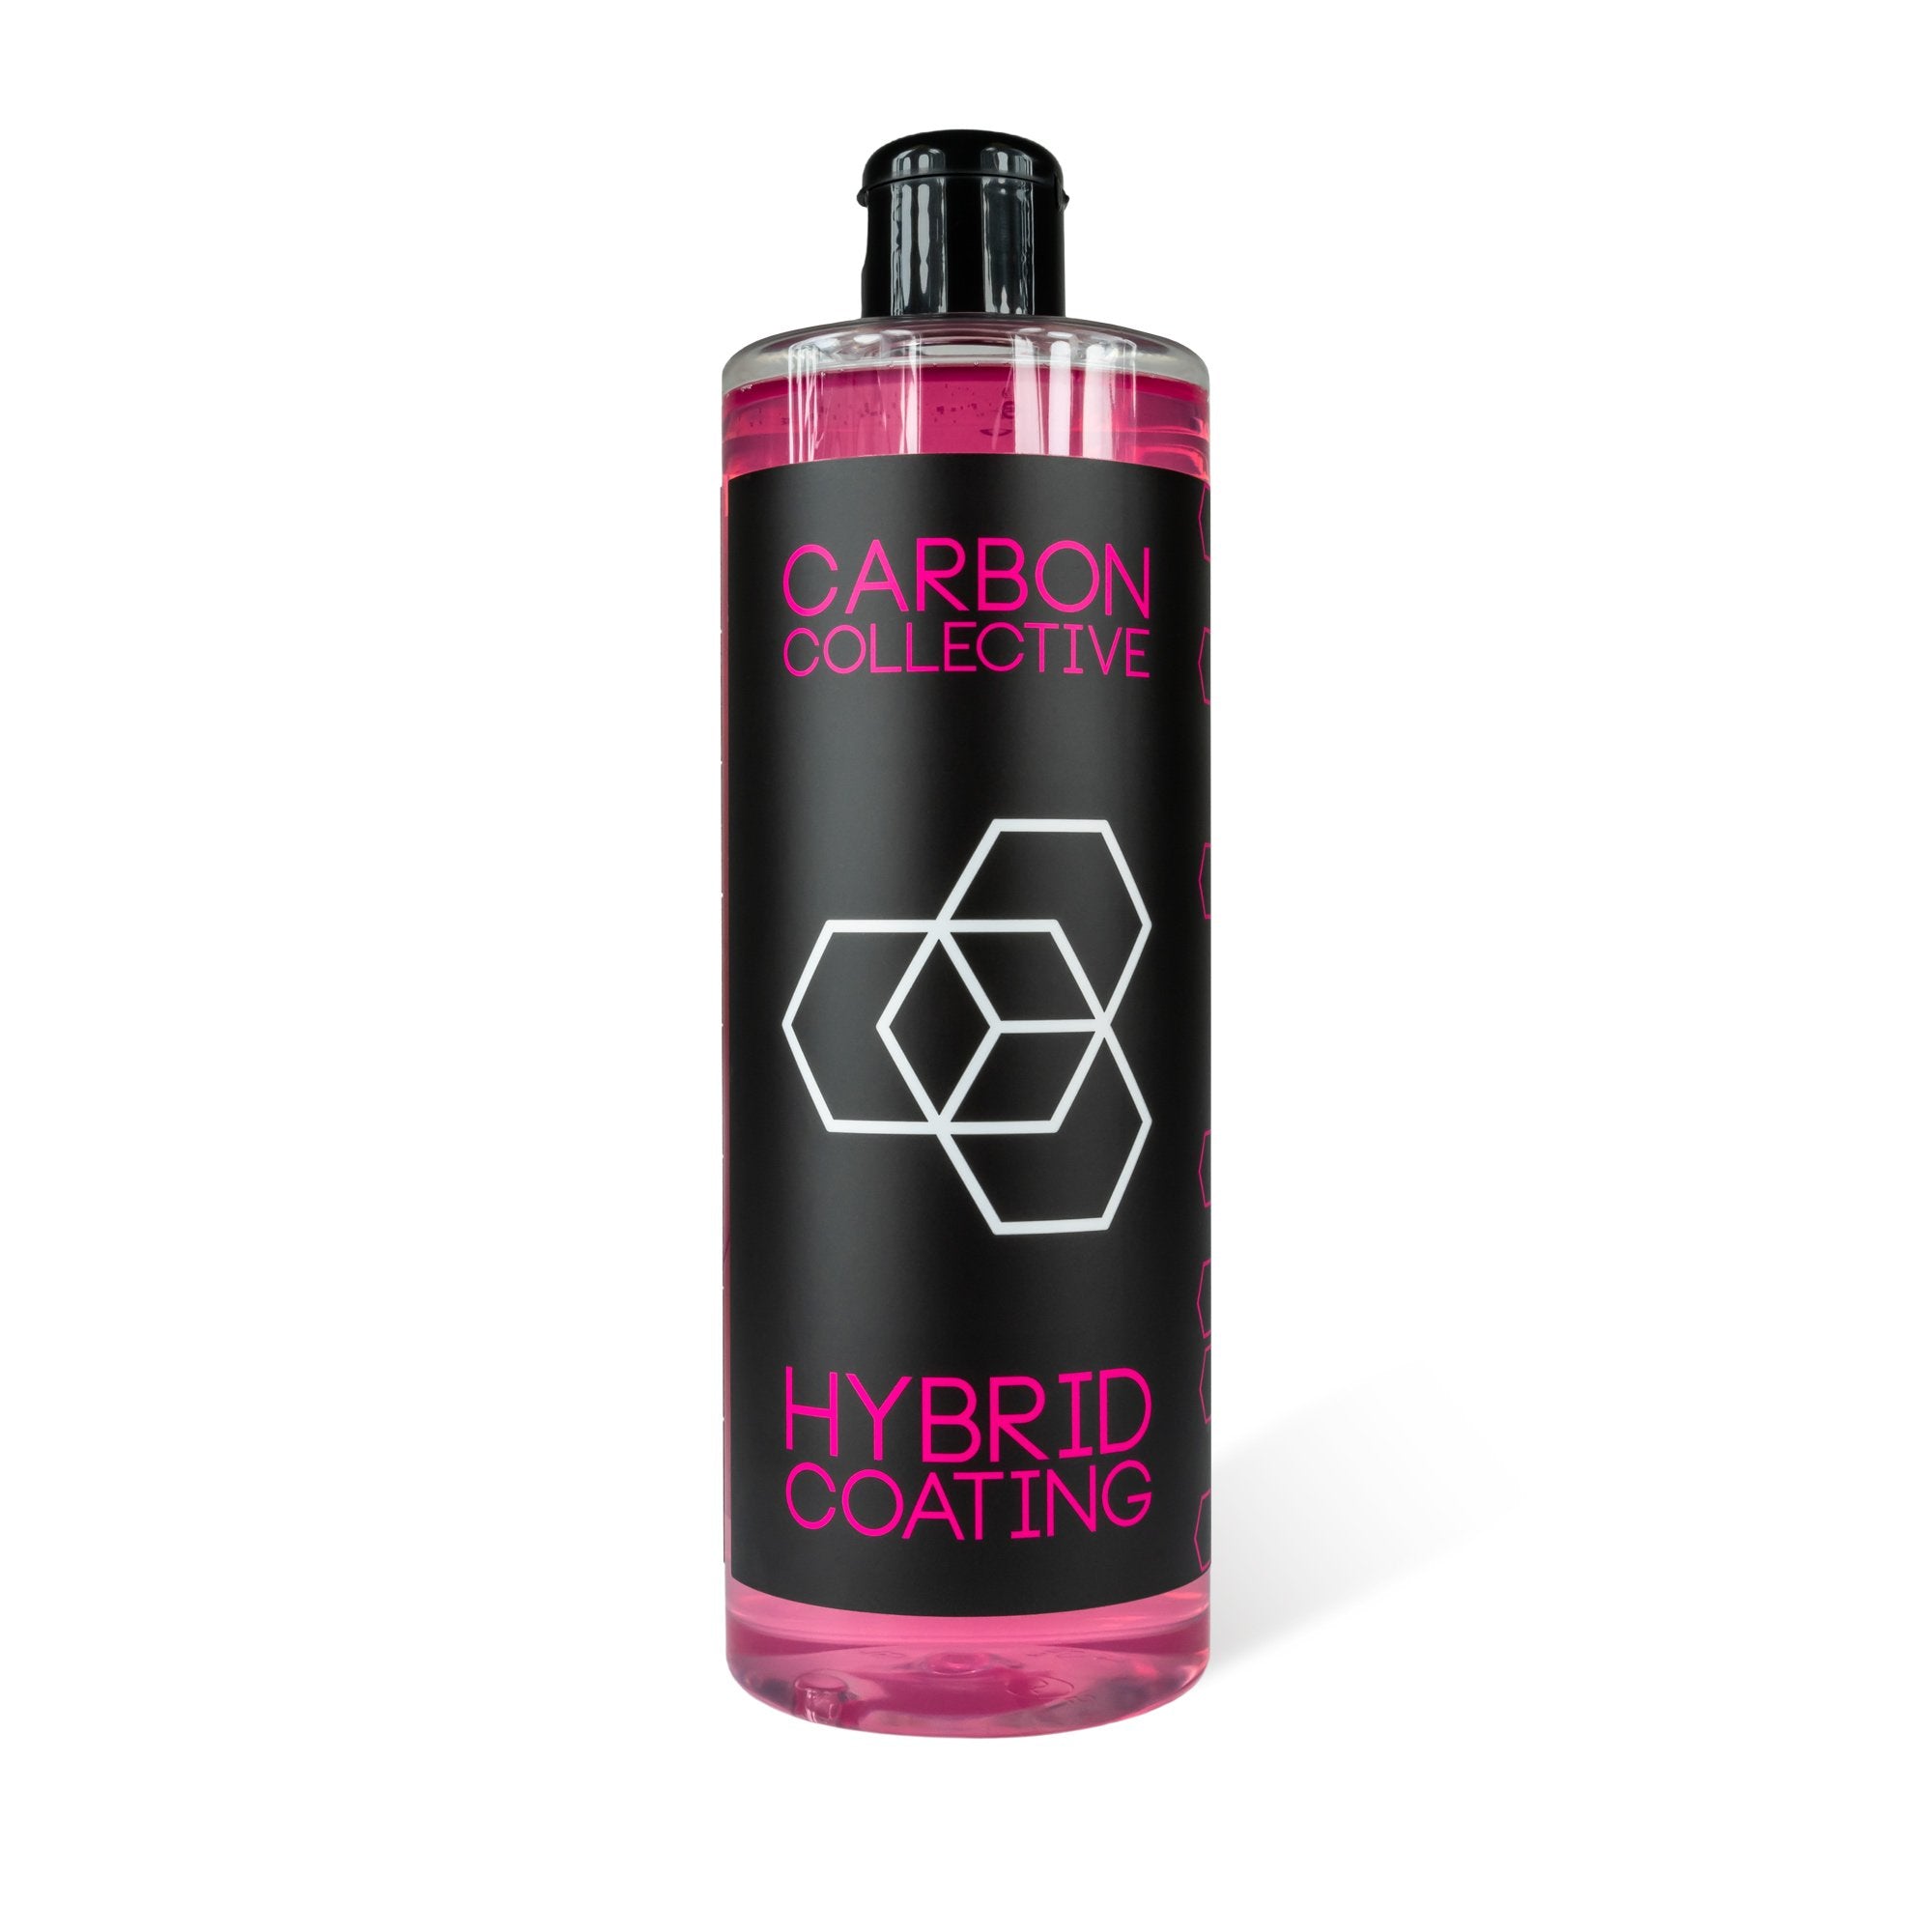 Carbon Collective Hybrid Coating 2.0 500ml – PINK